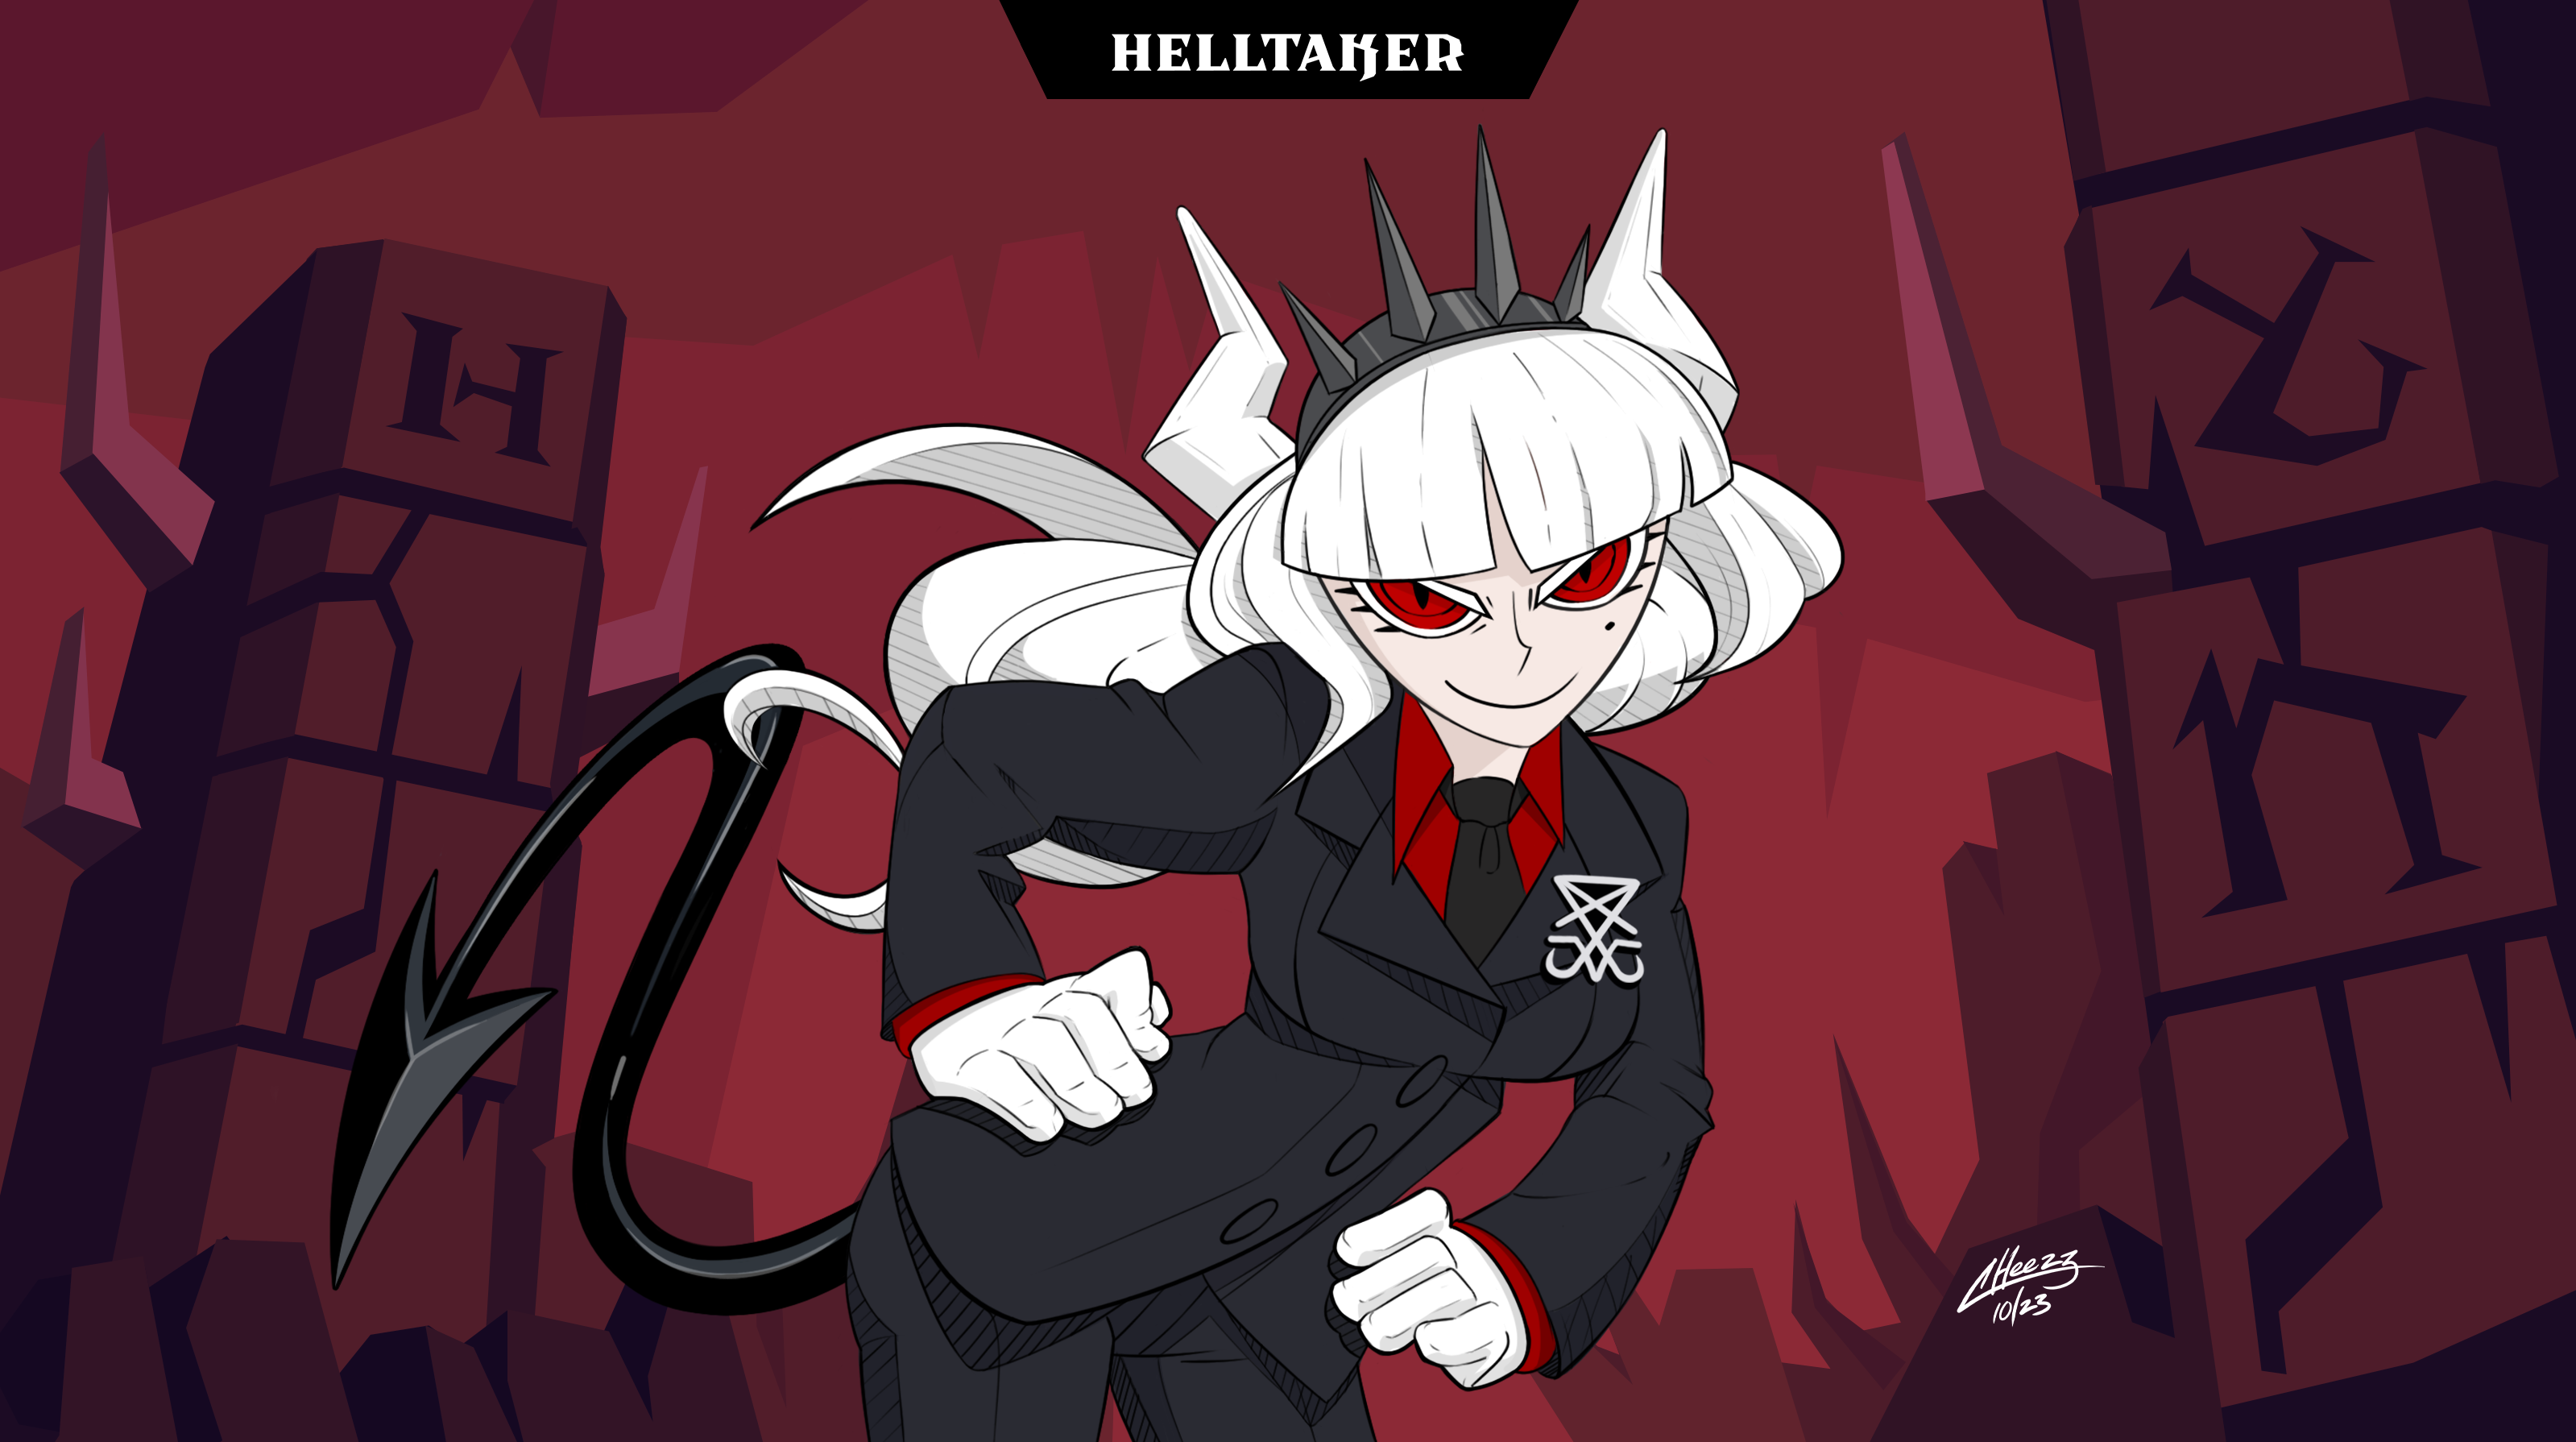 Lucifer Helltaker Suits Tail Horns Red Eyes Red Background Digital Art Watermarked 2023 Year Video G 3198x1790